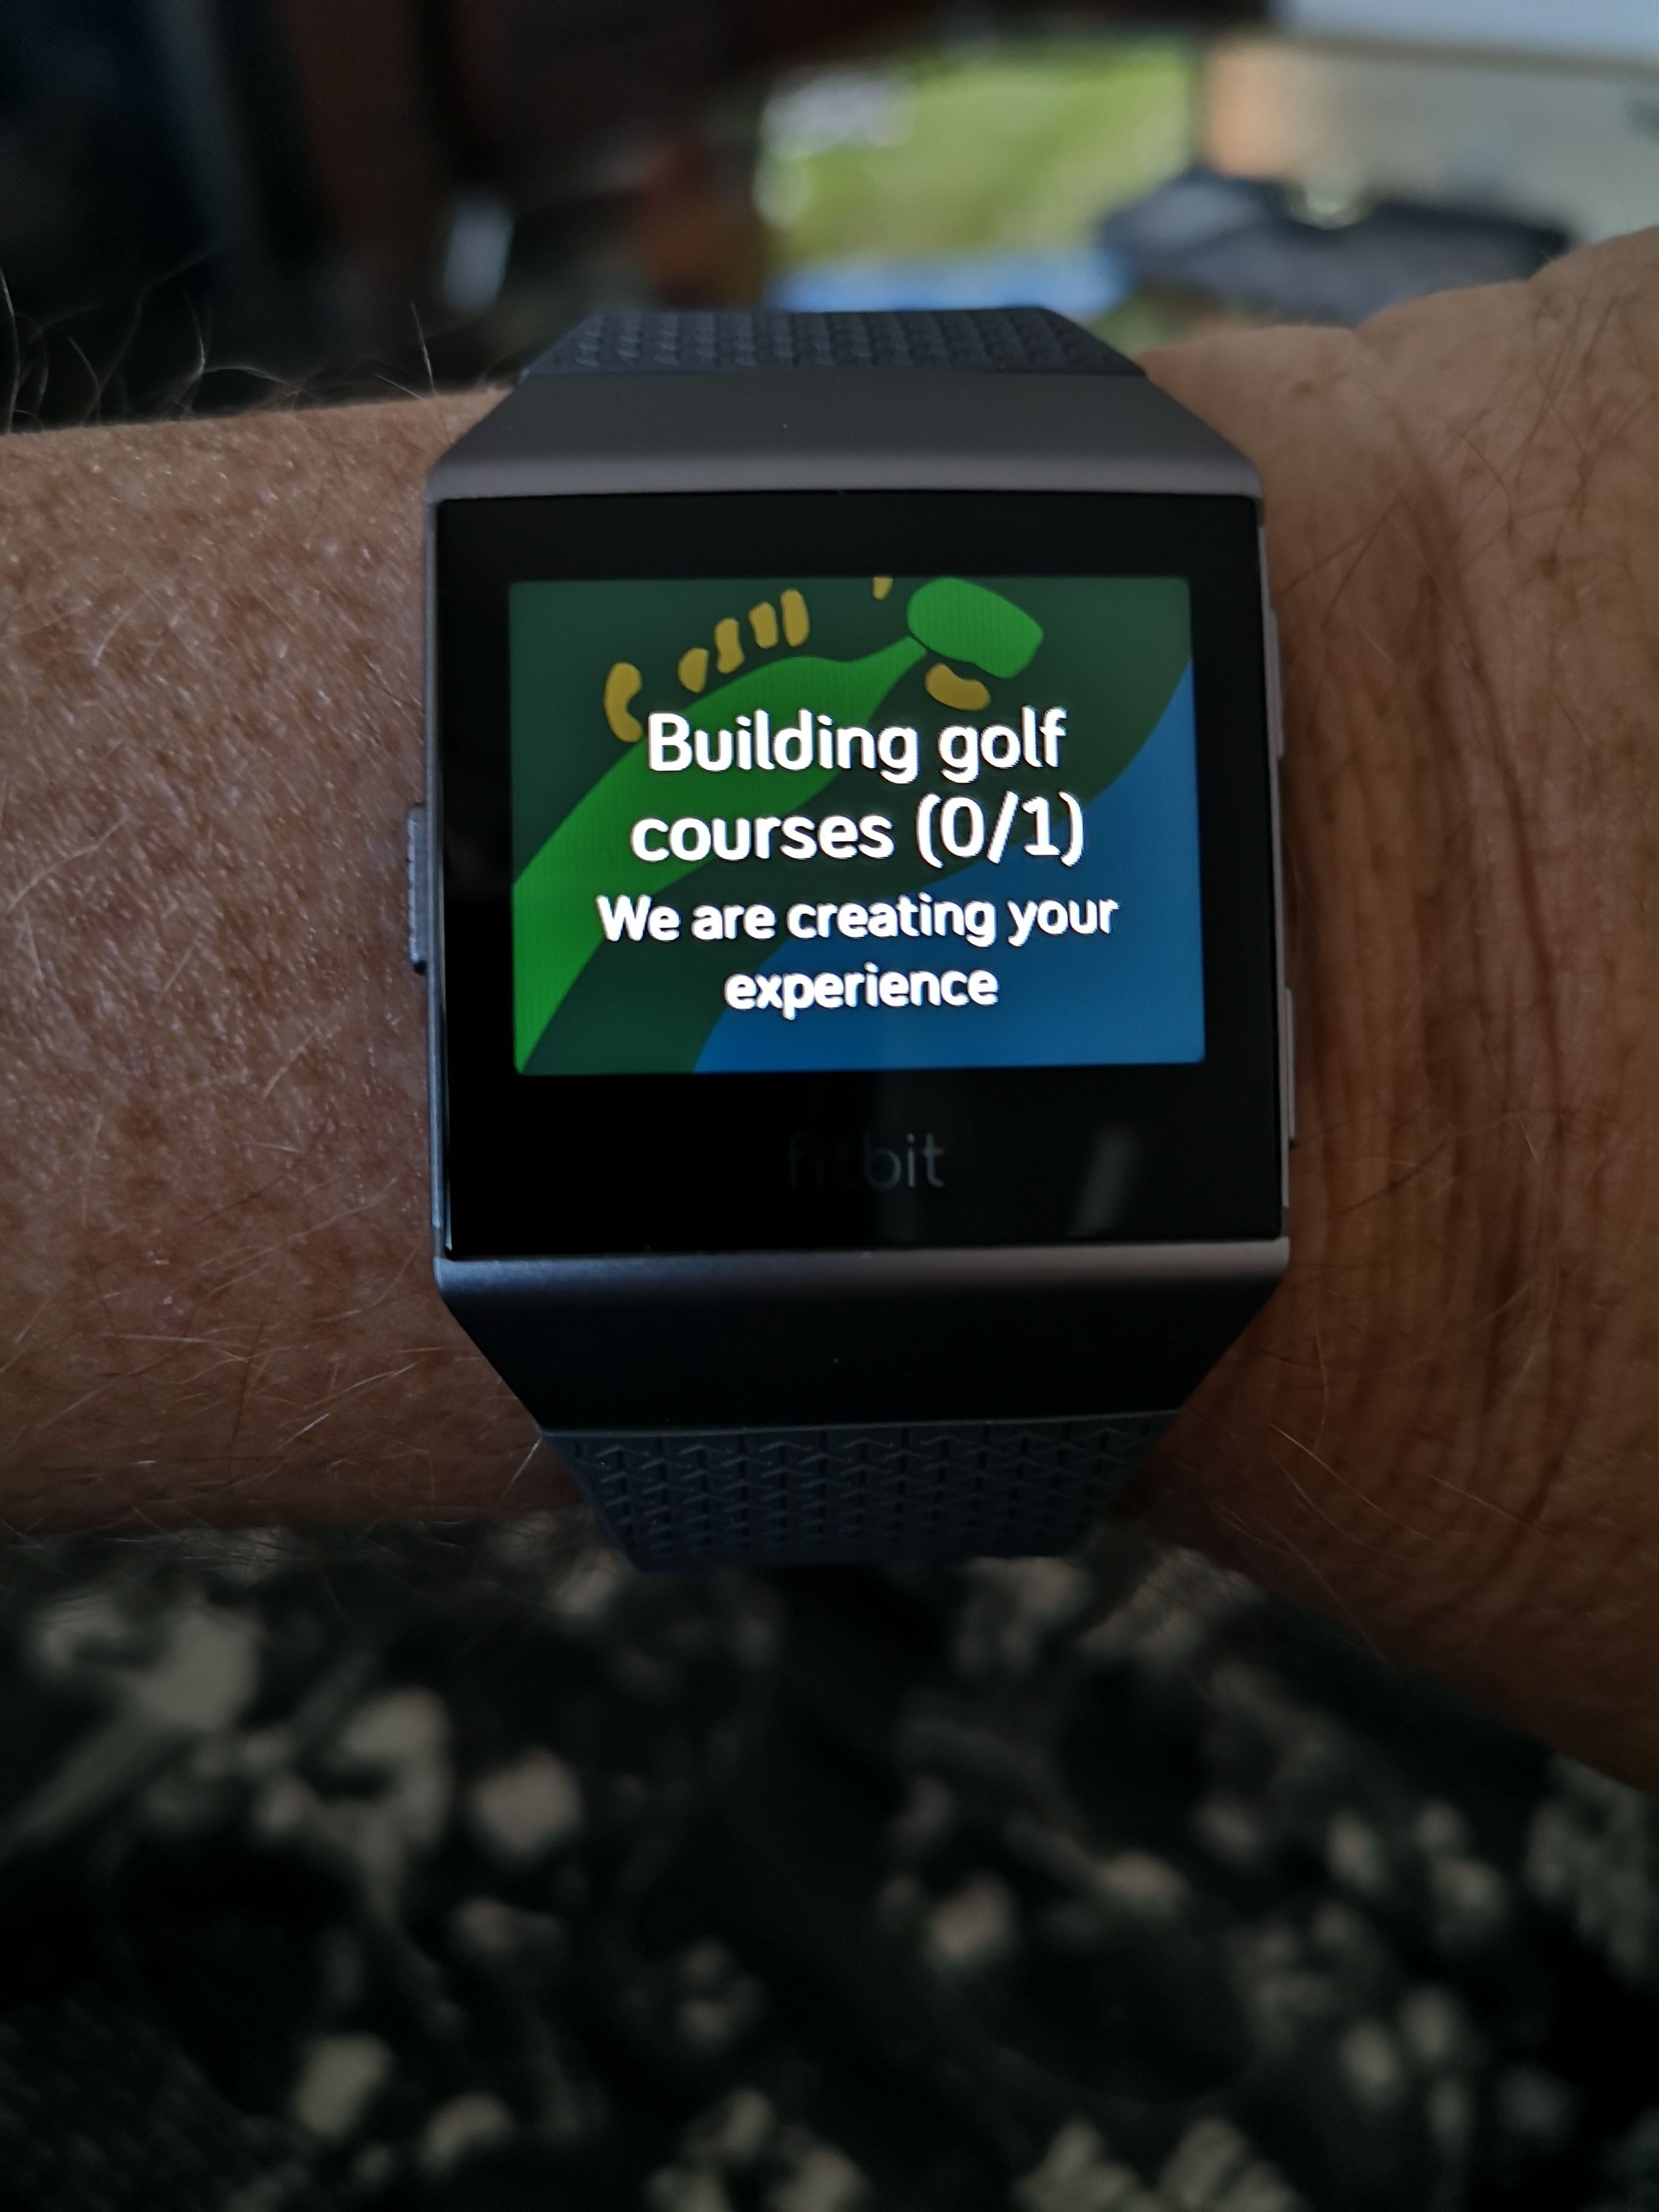 golf gps for fitbit